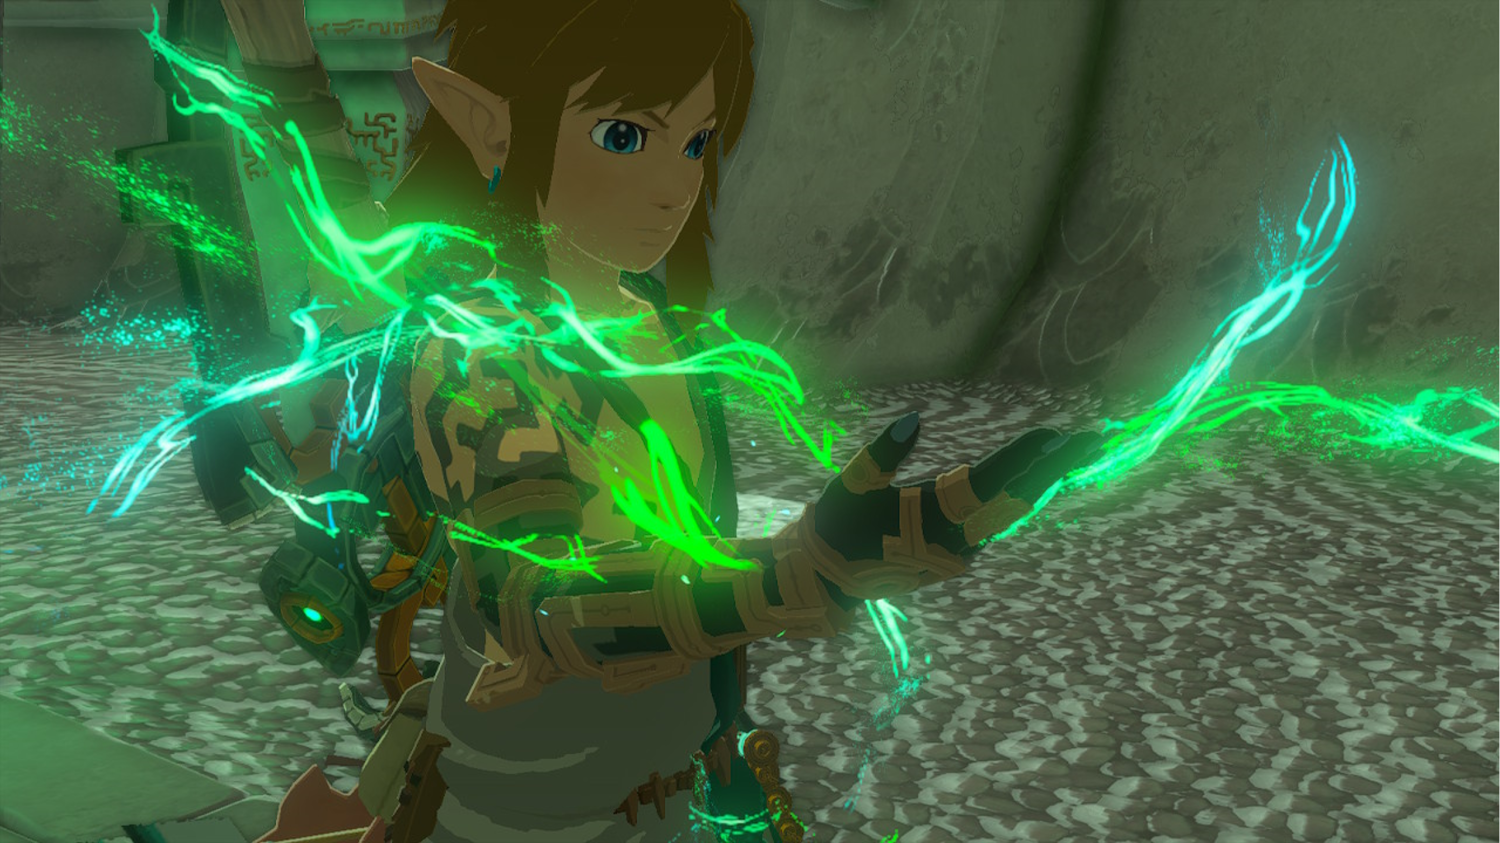 The Legend of Zelda: Tears of the Kingdom sold 18.51 million units in Q1  2024